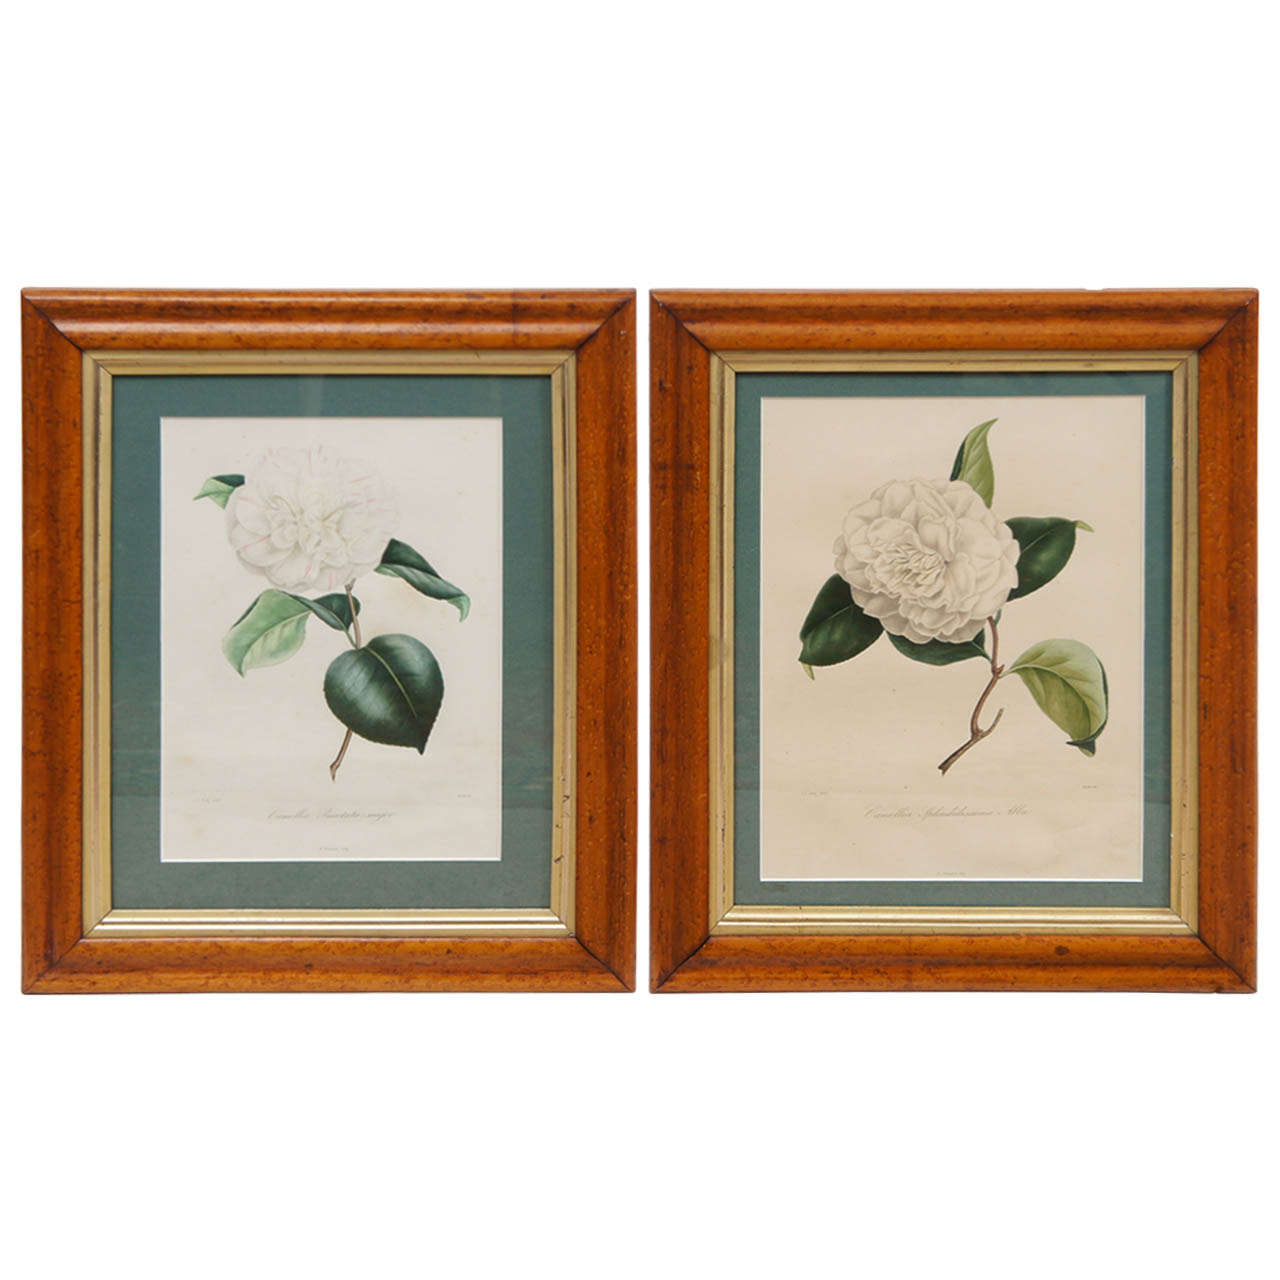 Two N.Remond Botanical Prints in Tiger Maple Frames, 19thC.